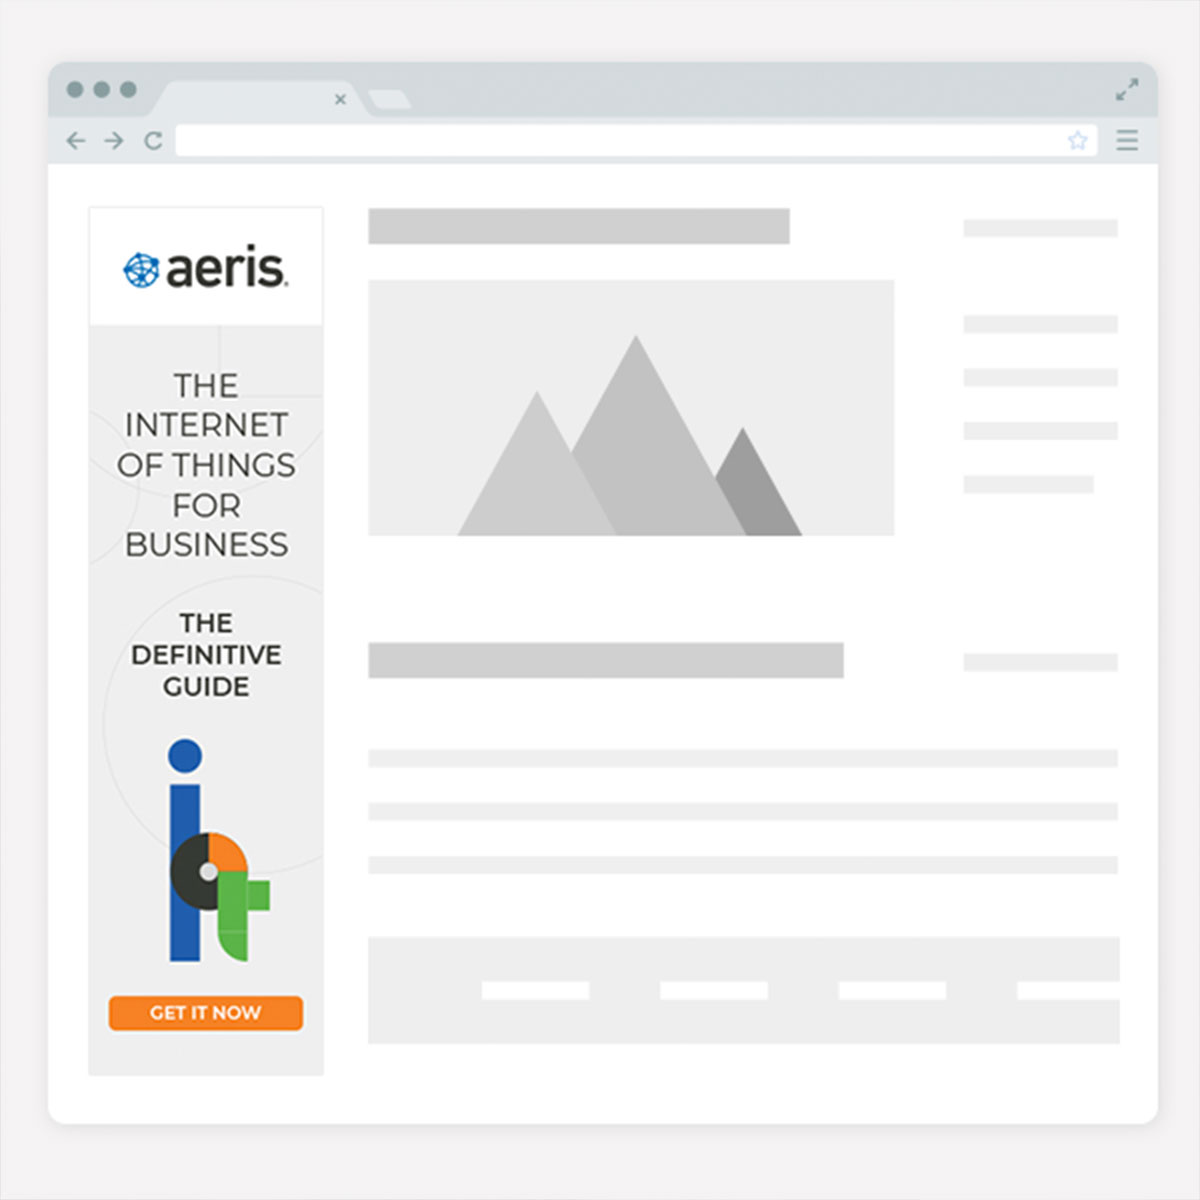 Aeris Internet of Things for Business 3rd Edition Book Campaign – Digital Web Ad